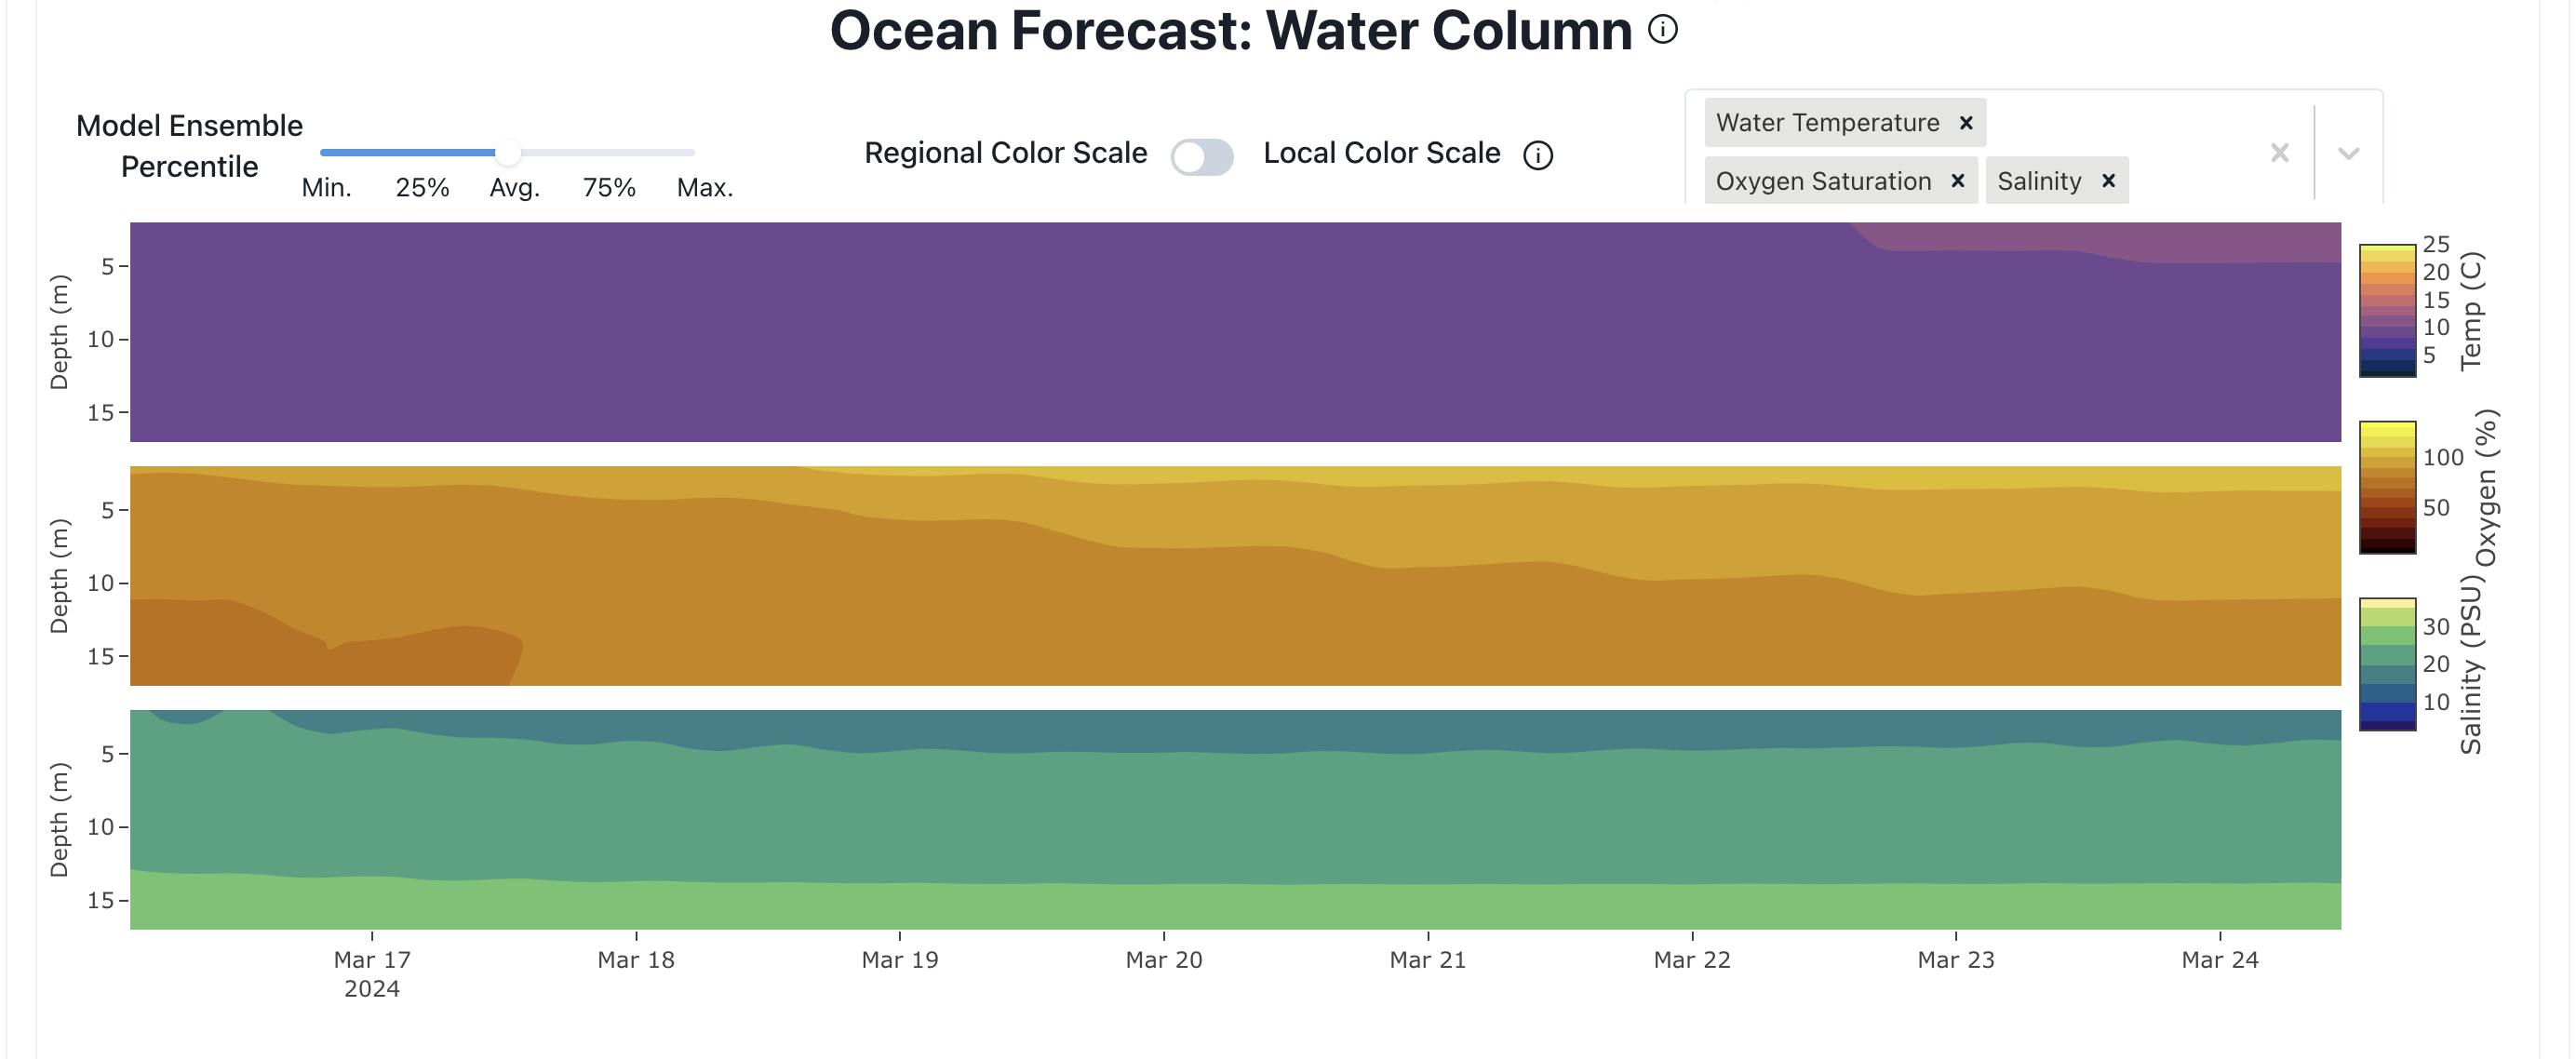 10 day water column forecast